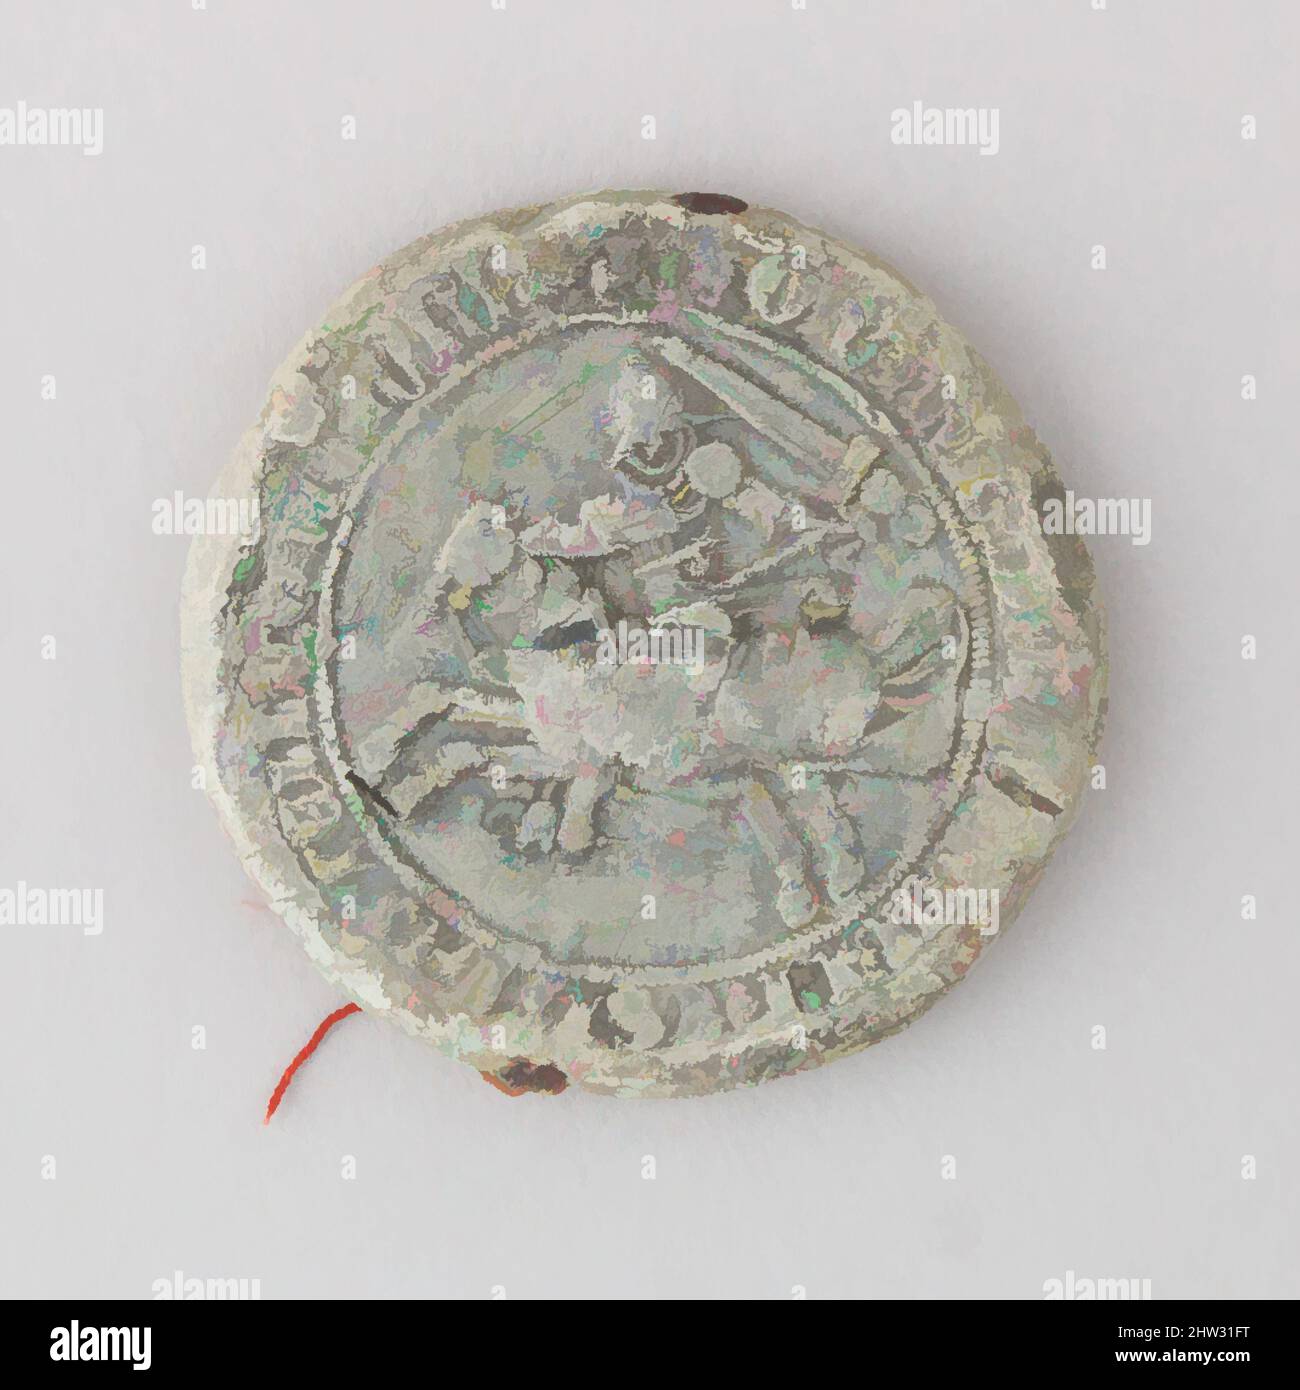 Art inspired by Seal of John II, King of Castile and Leon, 15th century, Spanish, Lead, Diam. 2 1/4 in. (5.7 cm); thickness 1/4 in. (0.6 cm); Wt. 5.2 oz. (147.4 g), Miscellaneous, Classic works modernized by Artotop with a splash of modernity. Shapes, color and value, eye-catching visual impact on art. Emotions through freedom of artworks in a contemporary way. A timeless message pursuing a wildly creative new direction. Artists turning to the digital medium and creating the Artotop NFT Stock Photo